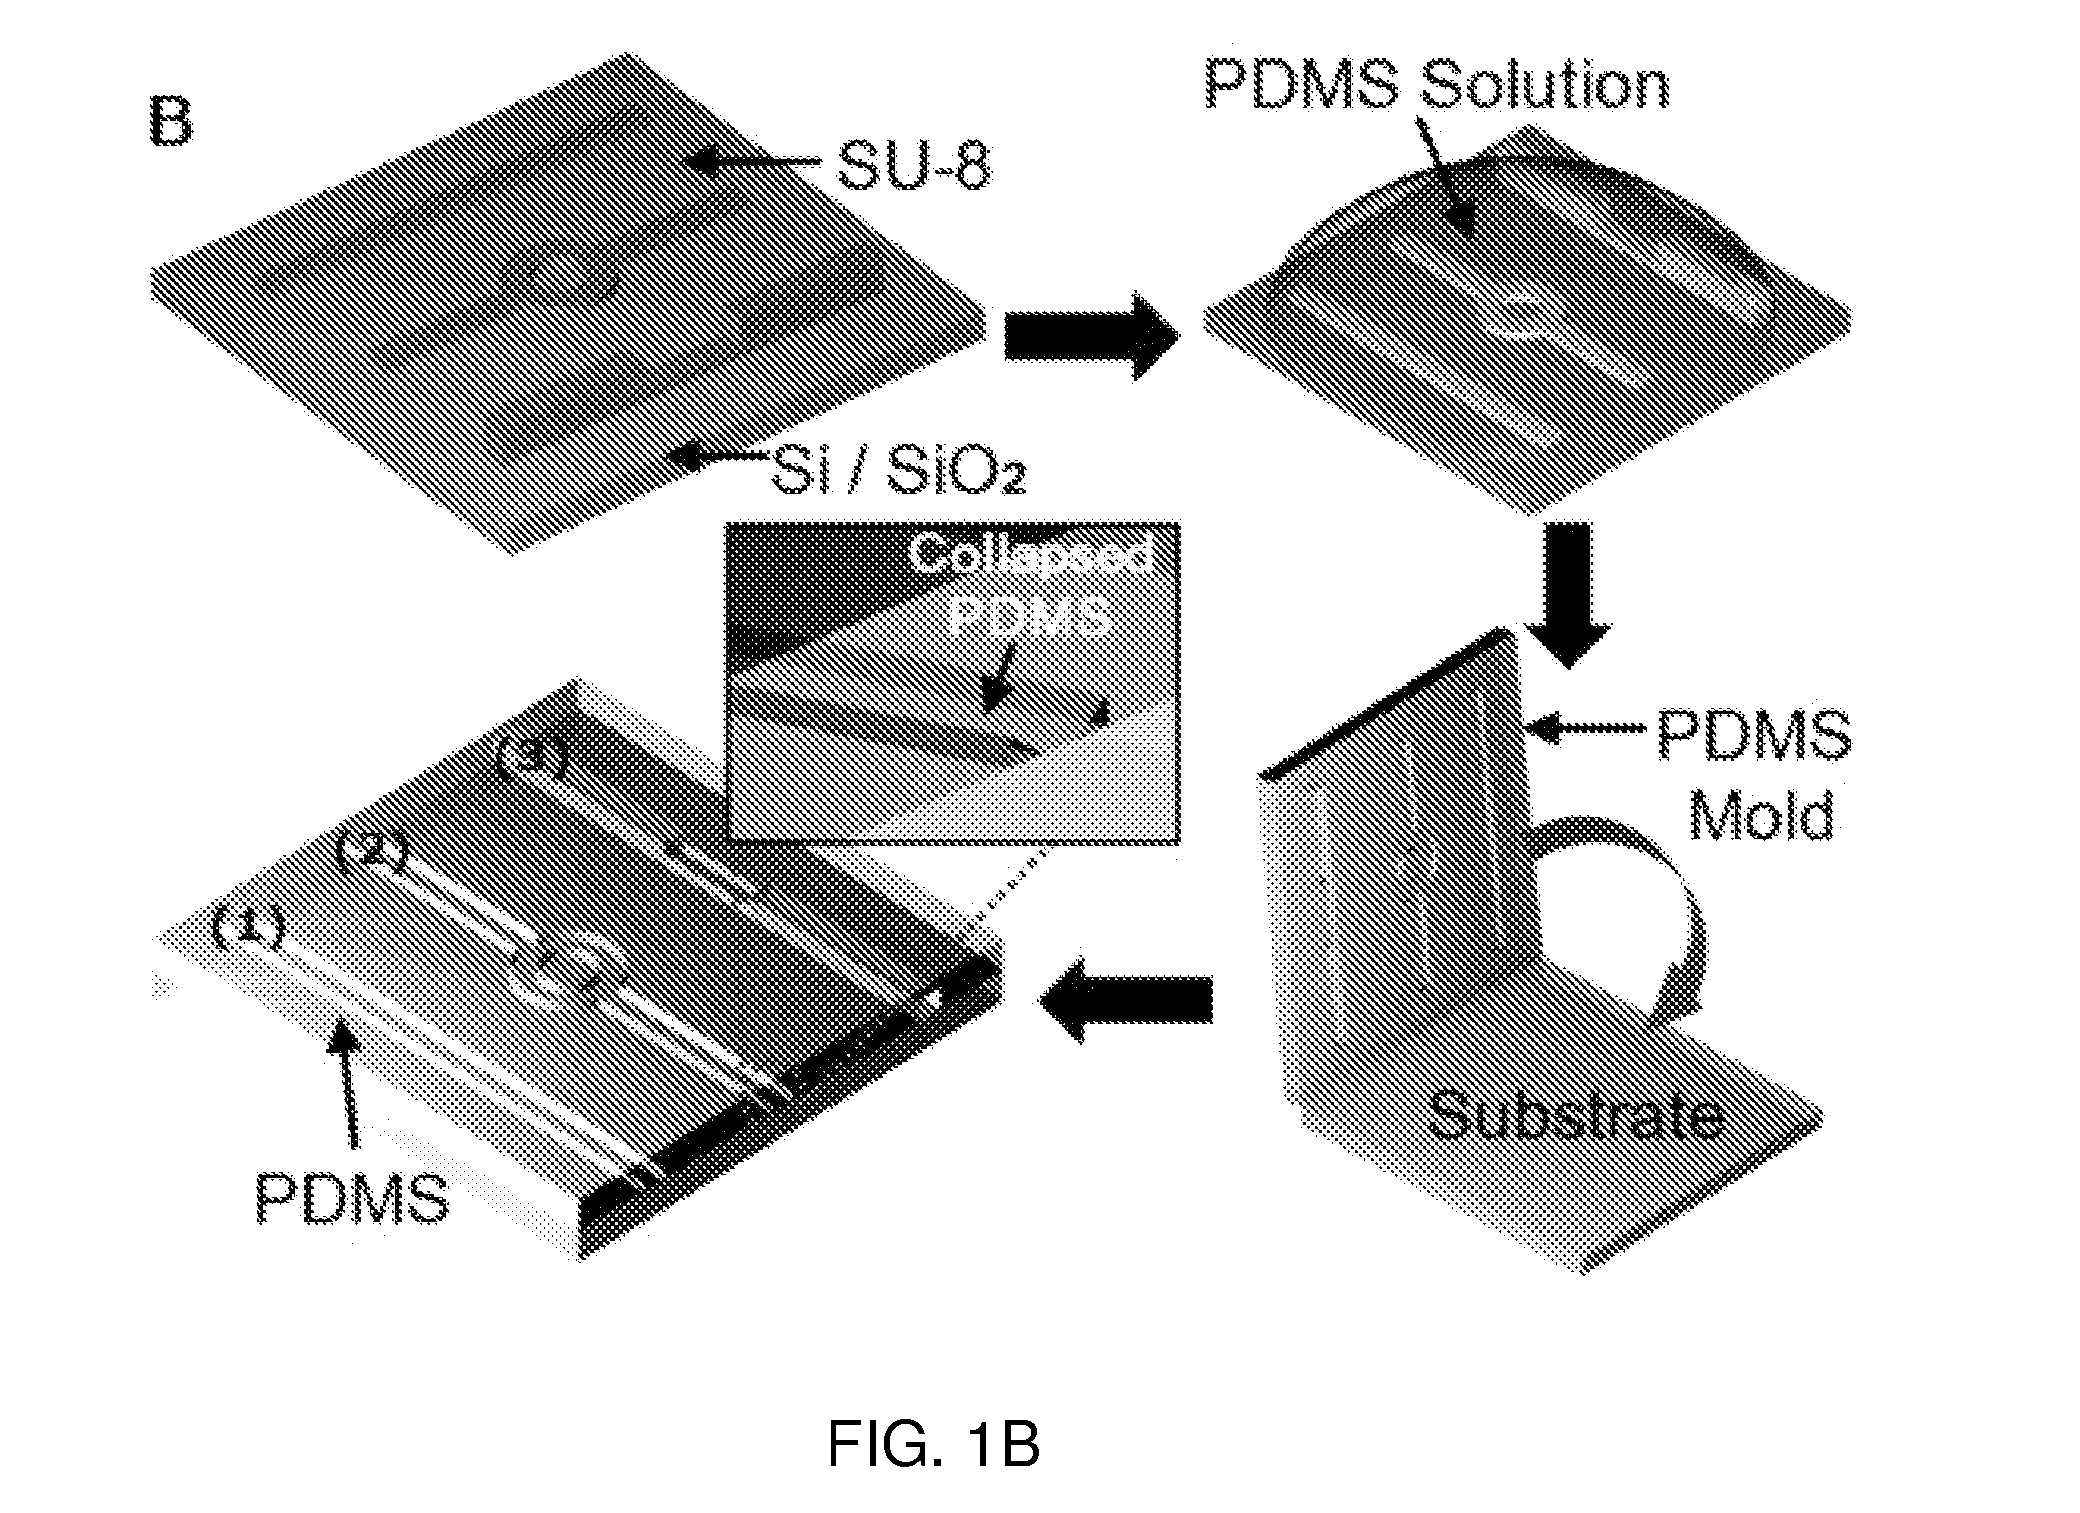 Nanofilter devices using elastomeric micro to nanochannel interfaces and methods based thereon